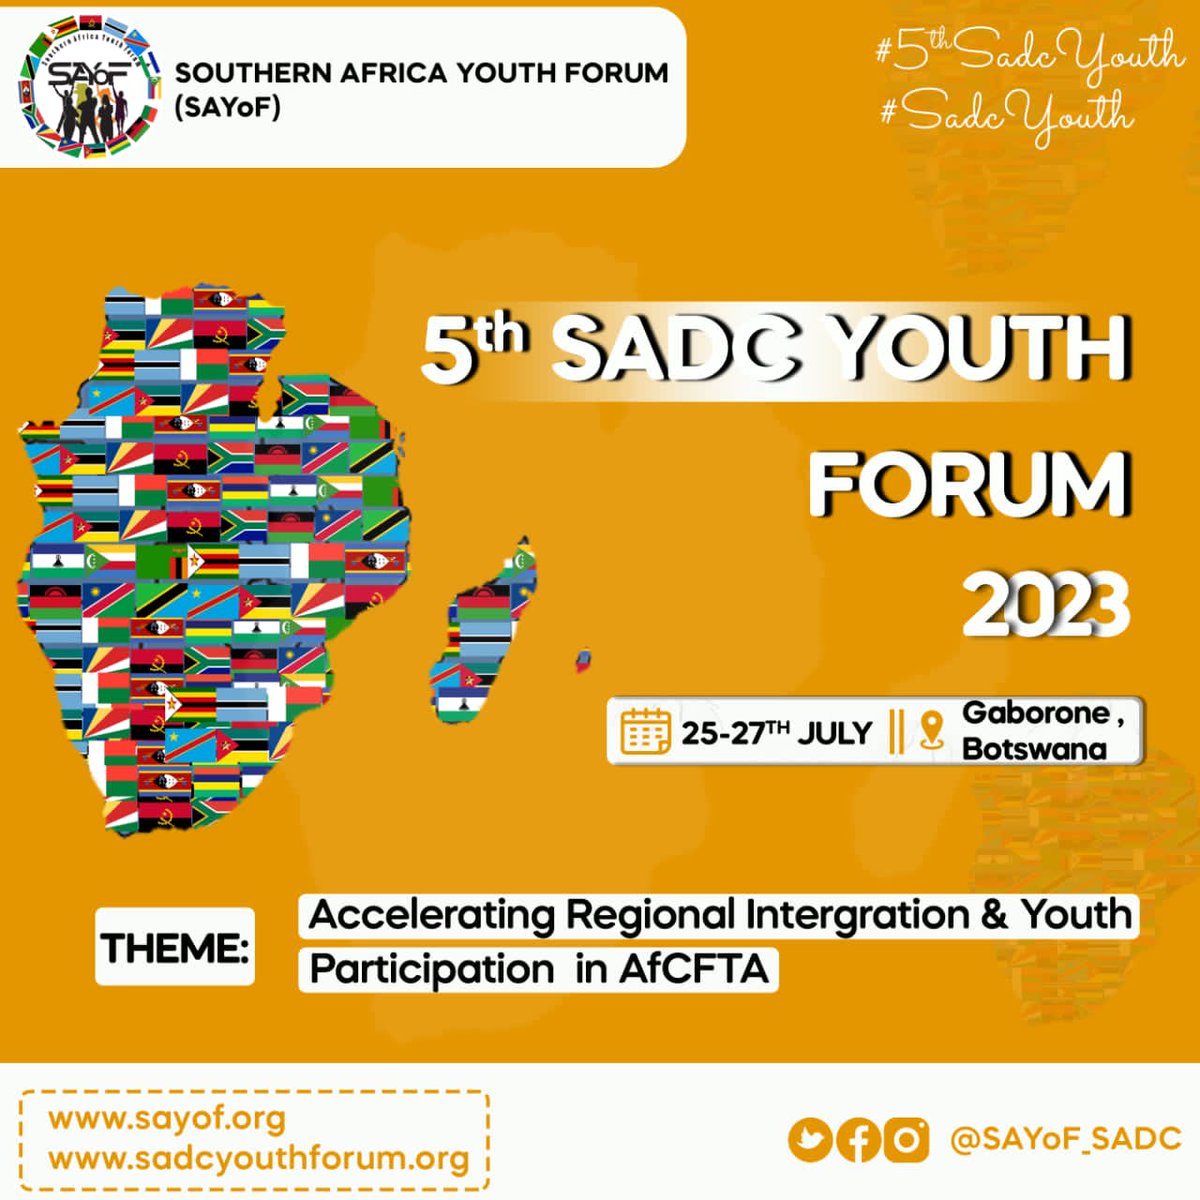 📢📢#SADCYouthNews: The #SADCYouthForum is back and bigger than ever‼️
Our 5th #SADCYouthForum will be held in Gaborone, Botswana 🇧🇼 from the 25th-27th of July under the theme: Accelerating Regional Integration & Youth Participation in AfCFTA.
#SADCYouth #SADCYouthForum